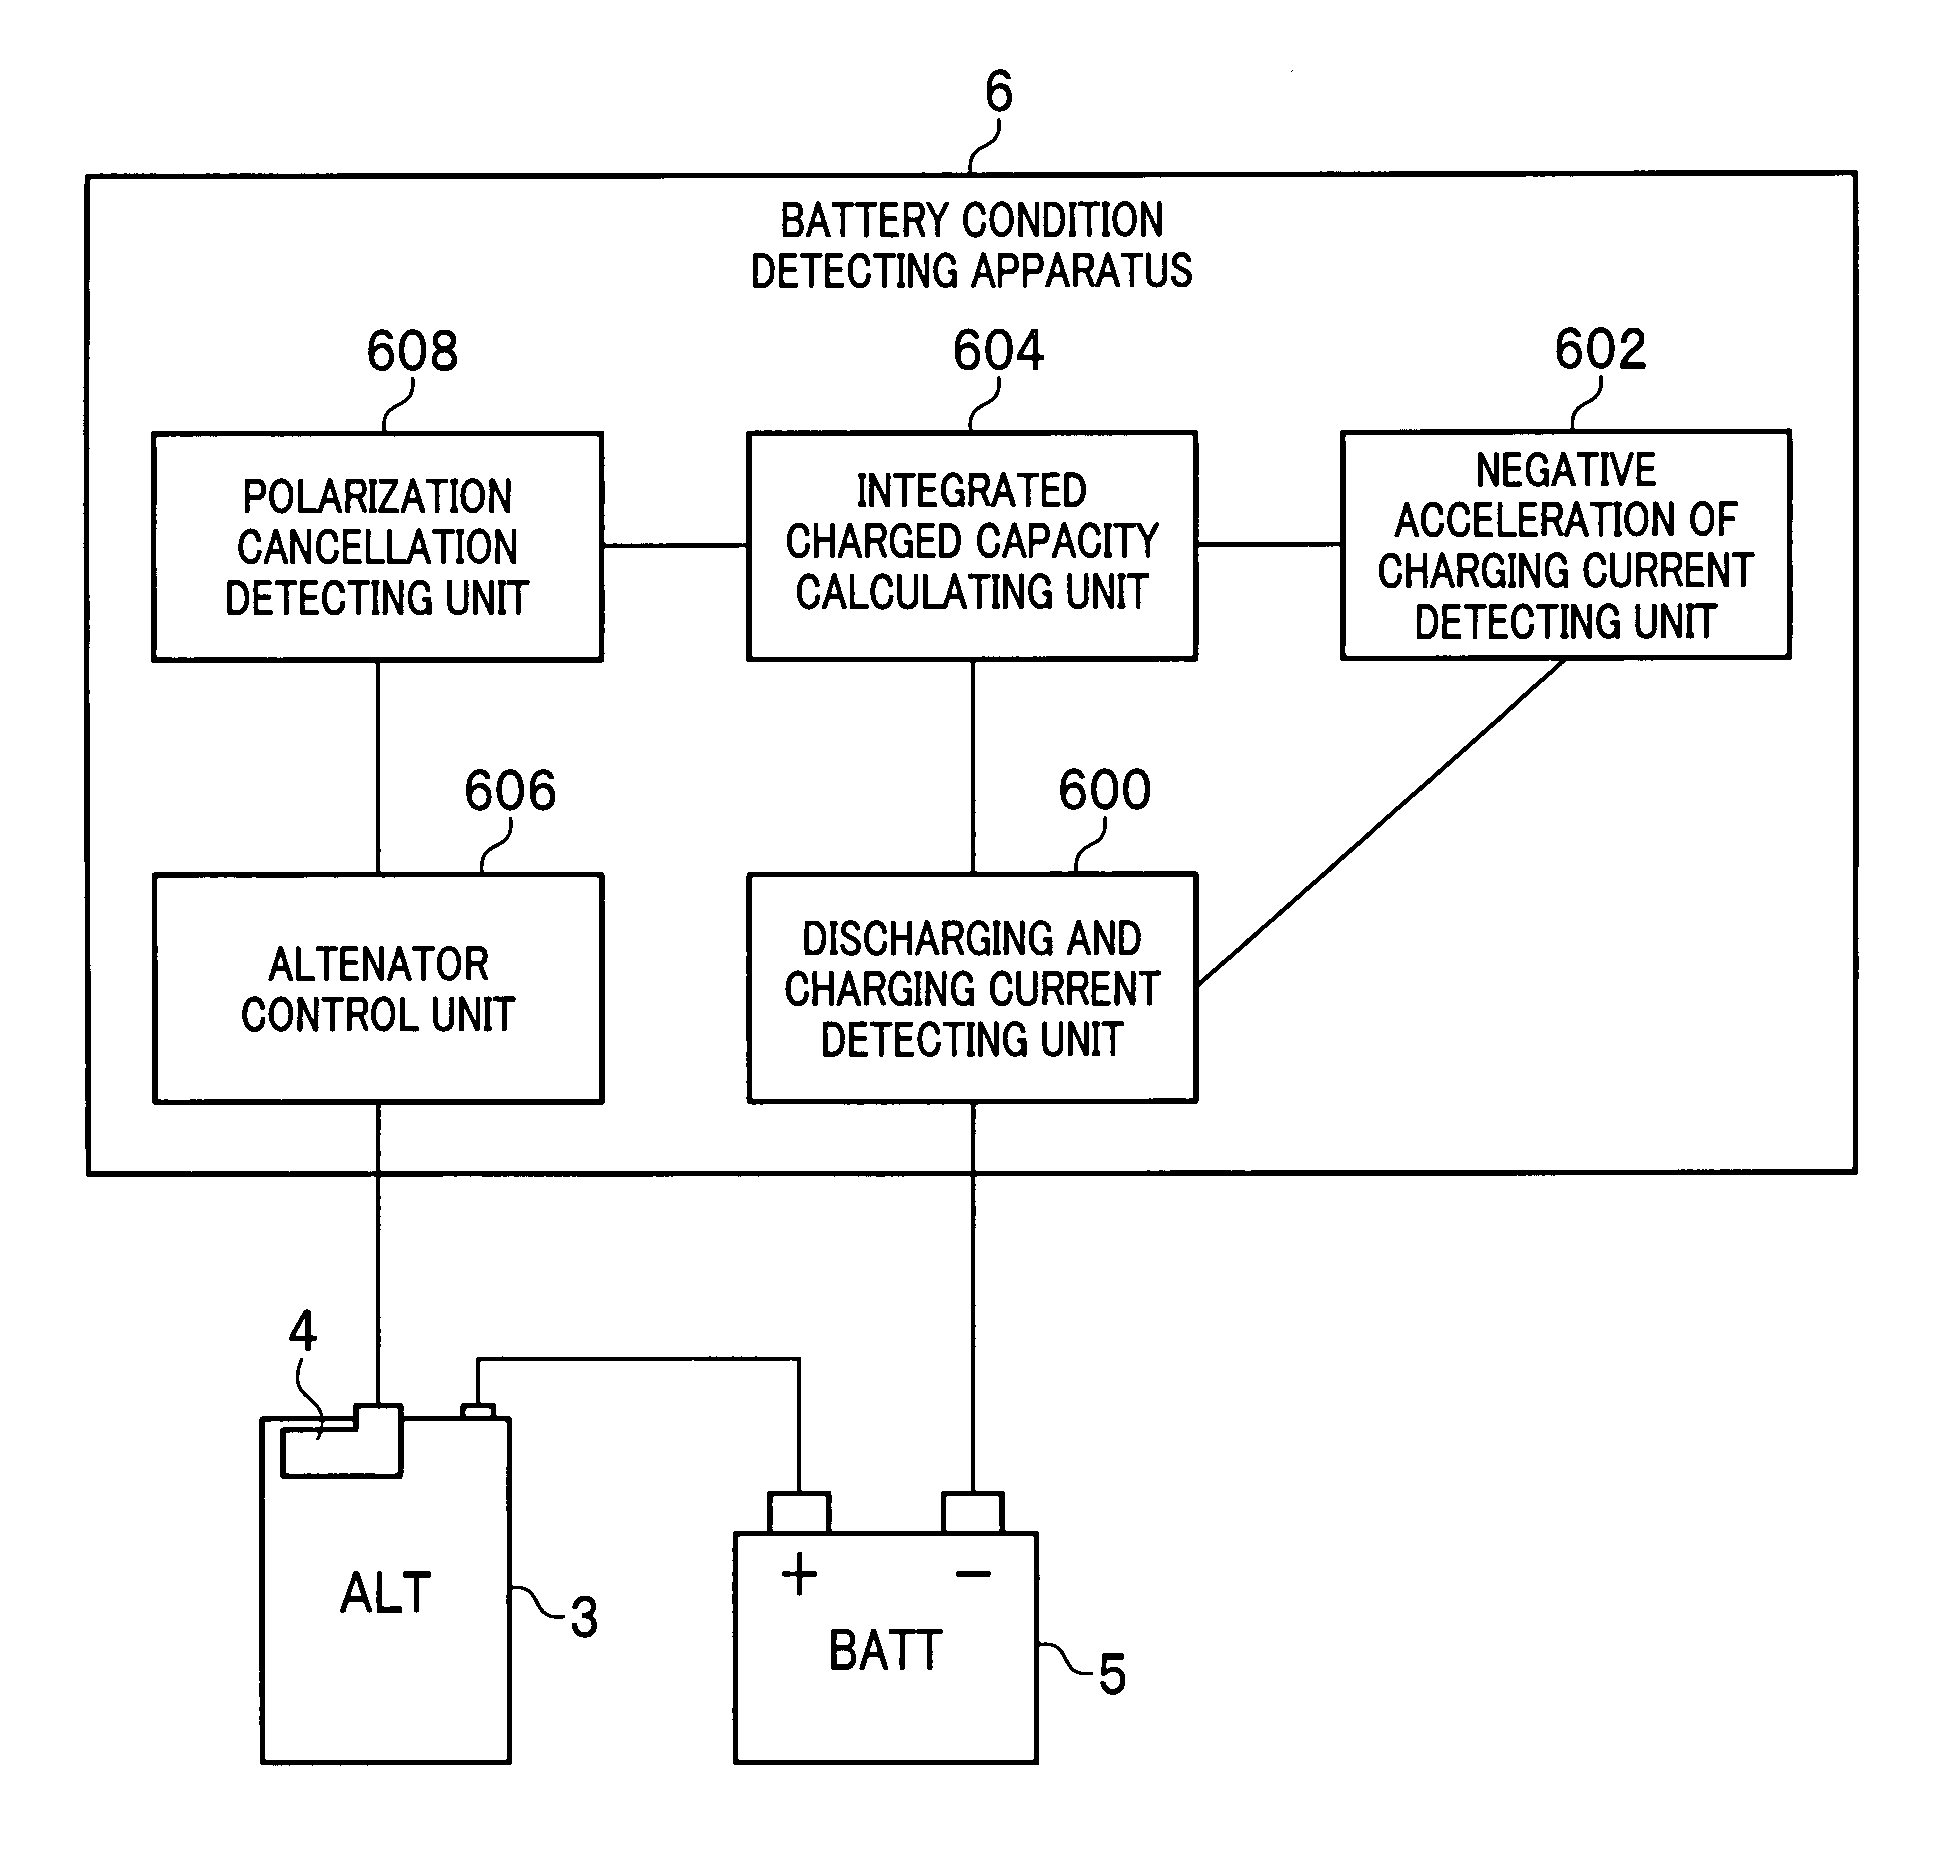 Battery condition detecting apparatus that detect cancellation of a polarization of a battery